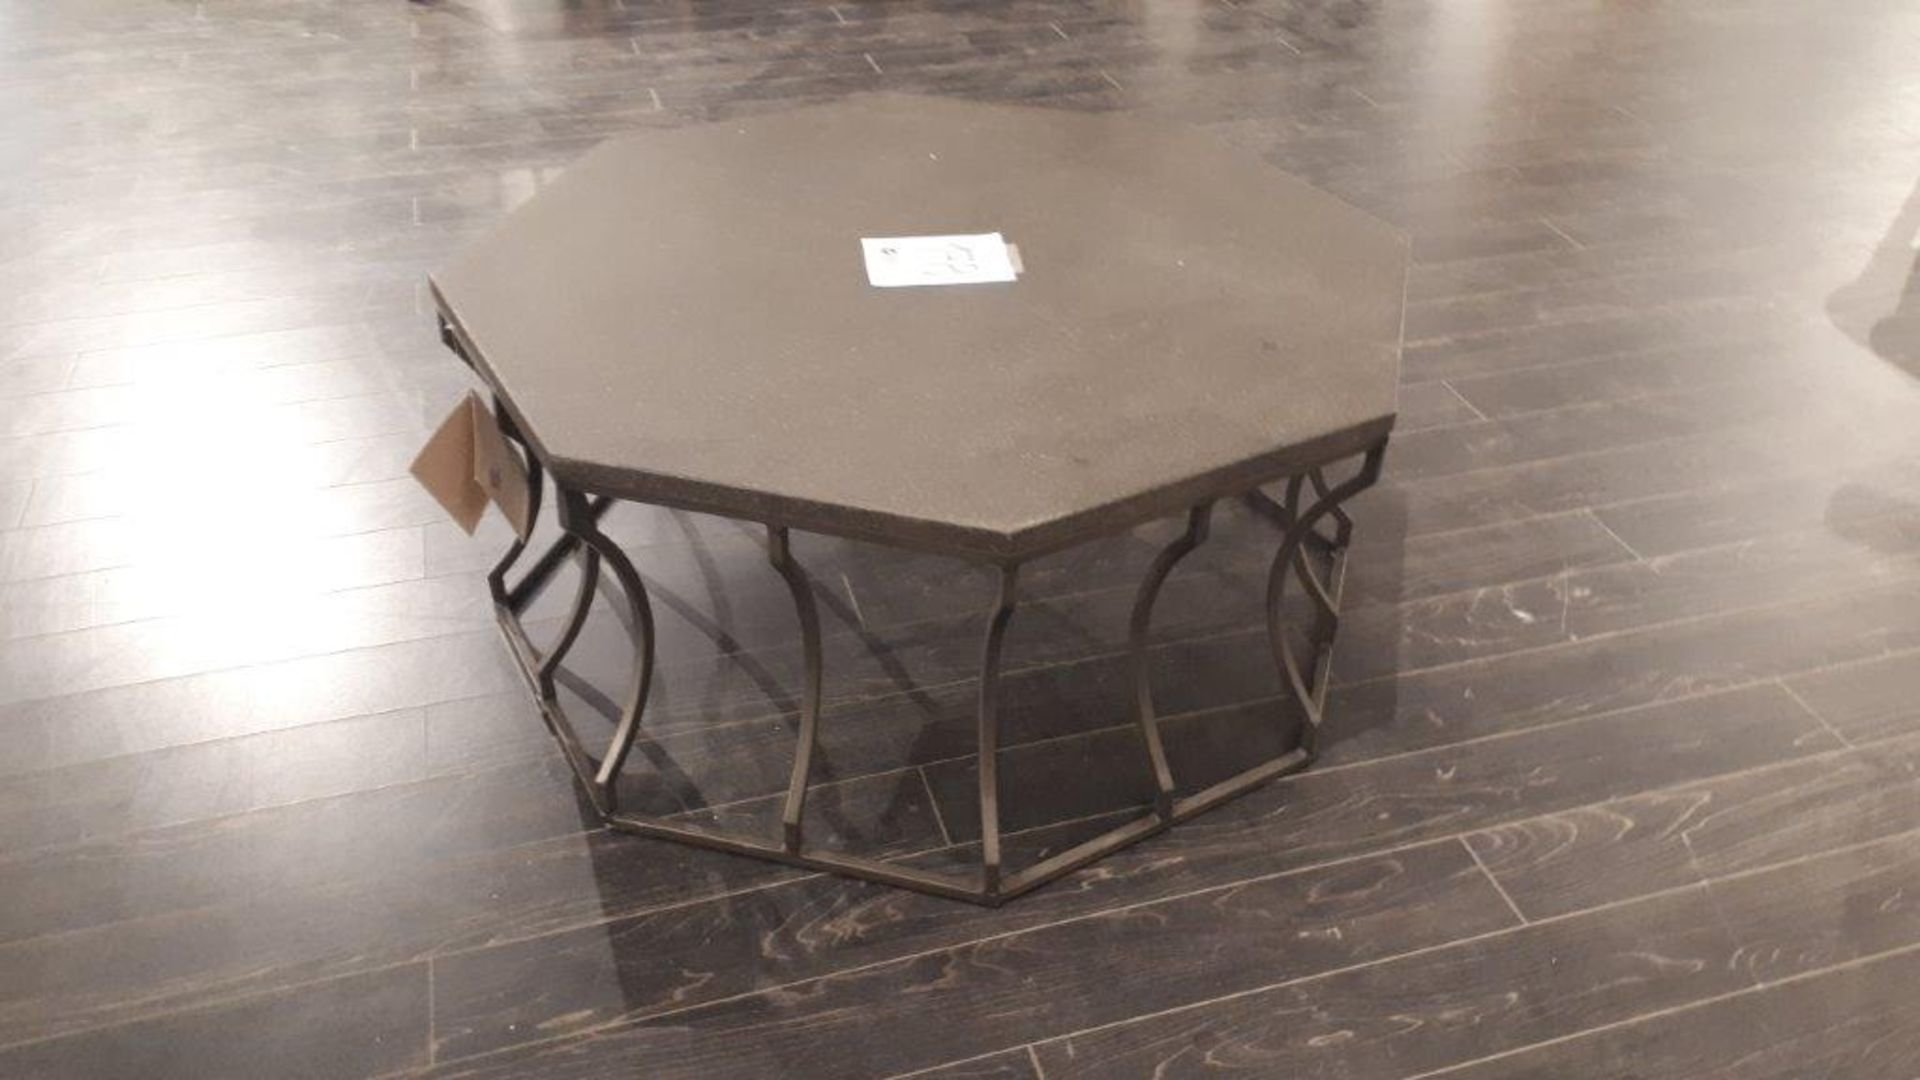 Octagon shaped table